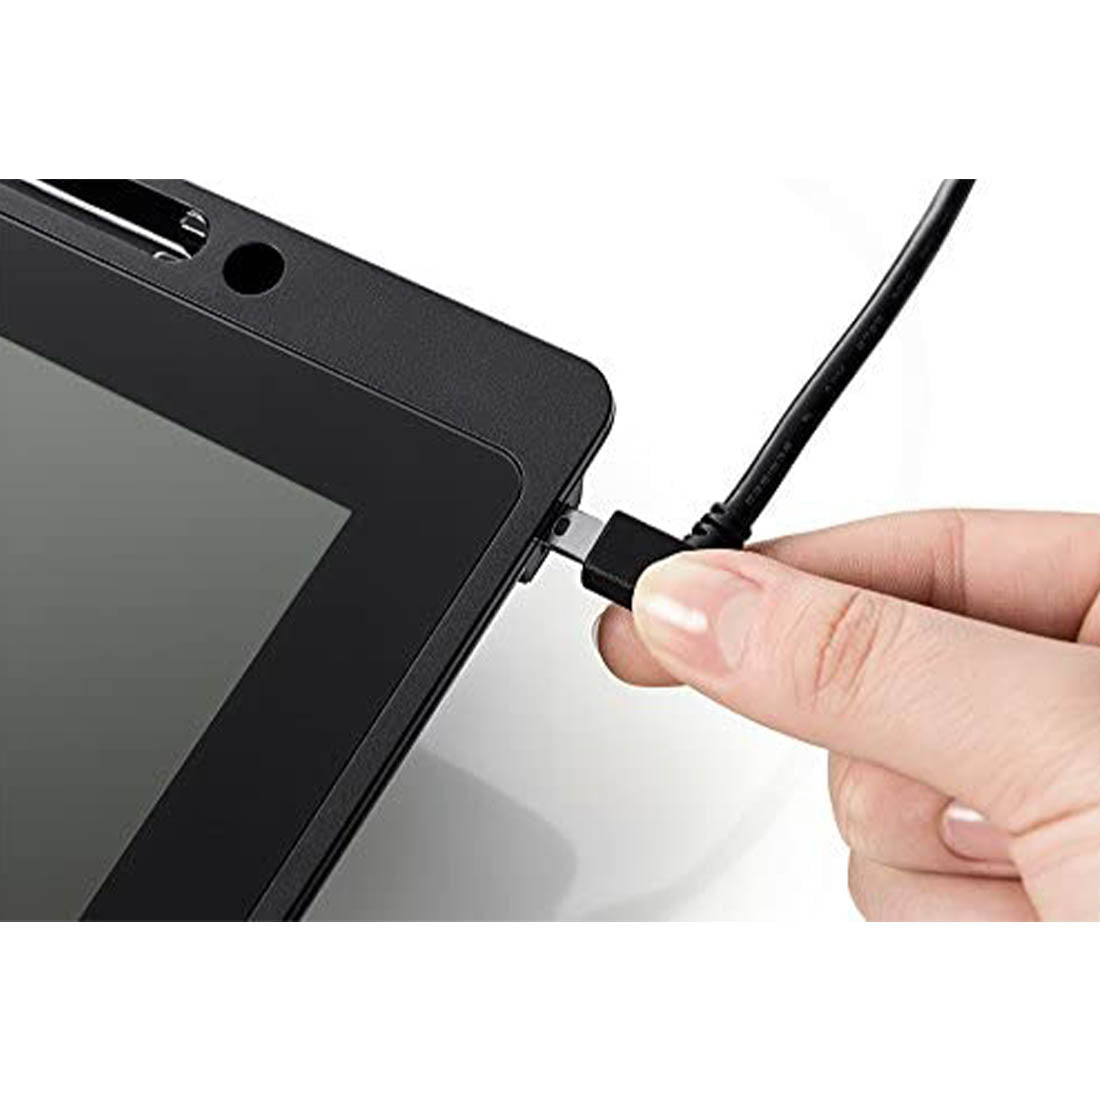 Wacom DTU-1141B 10.1 Inch FHD Pen Display with AES RSA Encryption and UID Support for Signature Capture